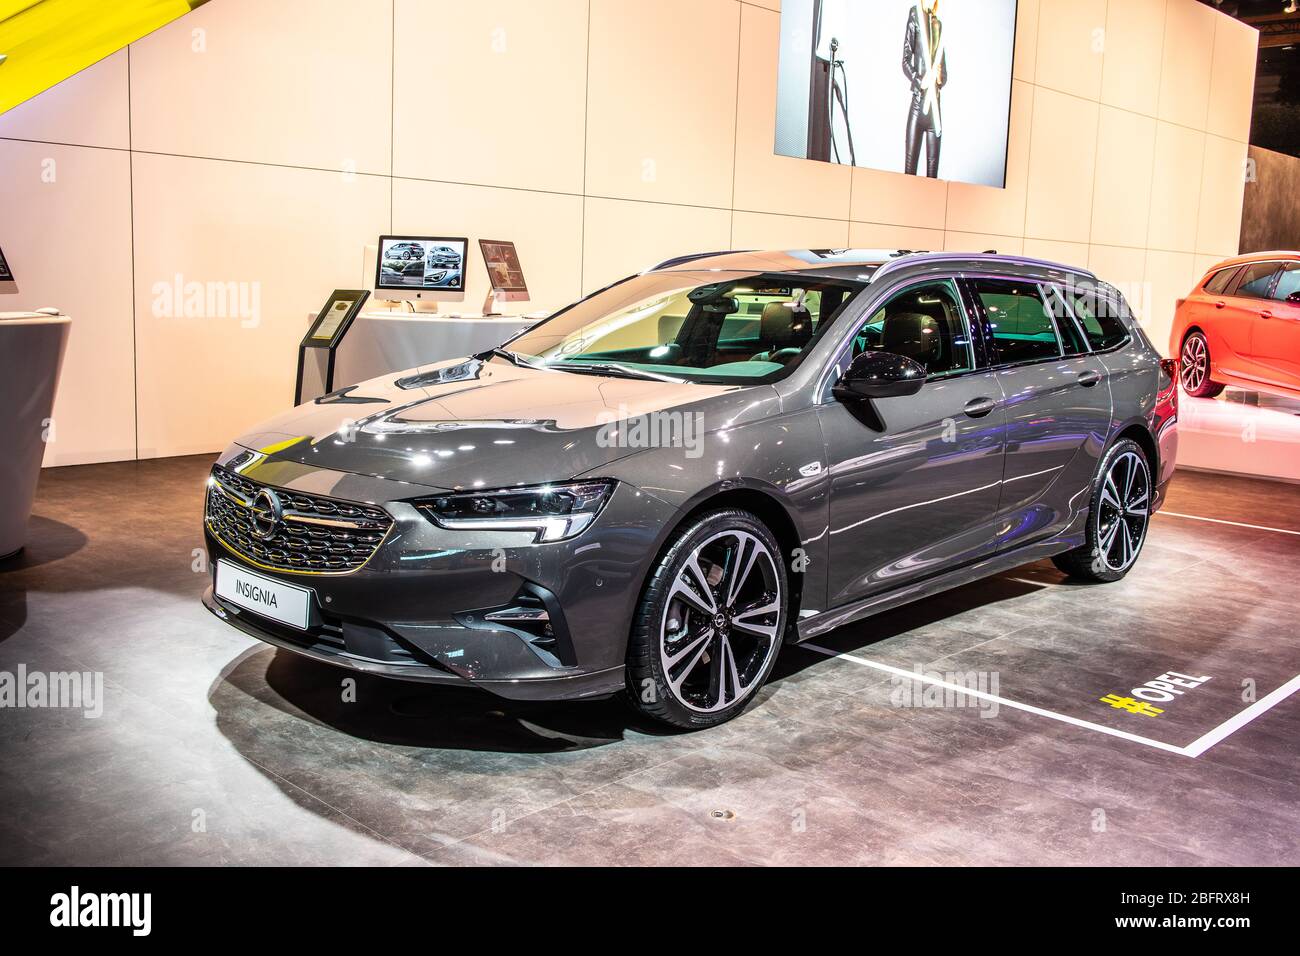 https://c8.alamy.com/comp/2BFRX8H/brussels-belgium-jan-2020-opel-insignia-sports-tourer-brussels-motor-show-2nd-gen-facelift-b-mkii-large-family-car-produced-by-opel-2BFRX8H.jpg